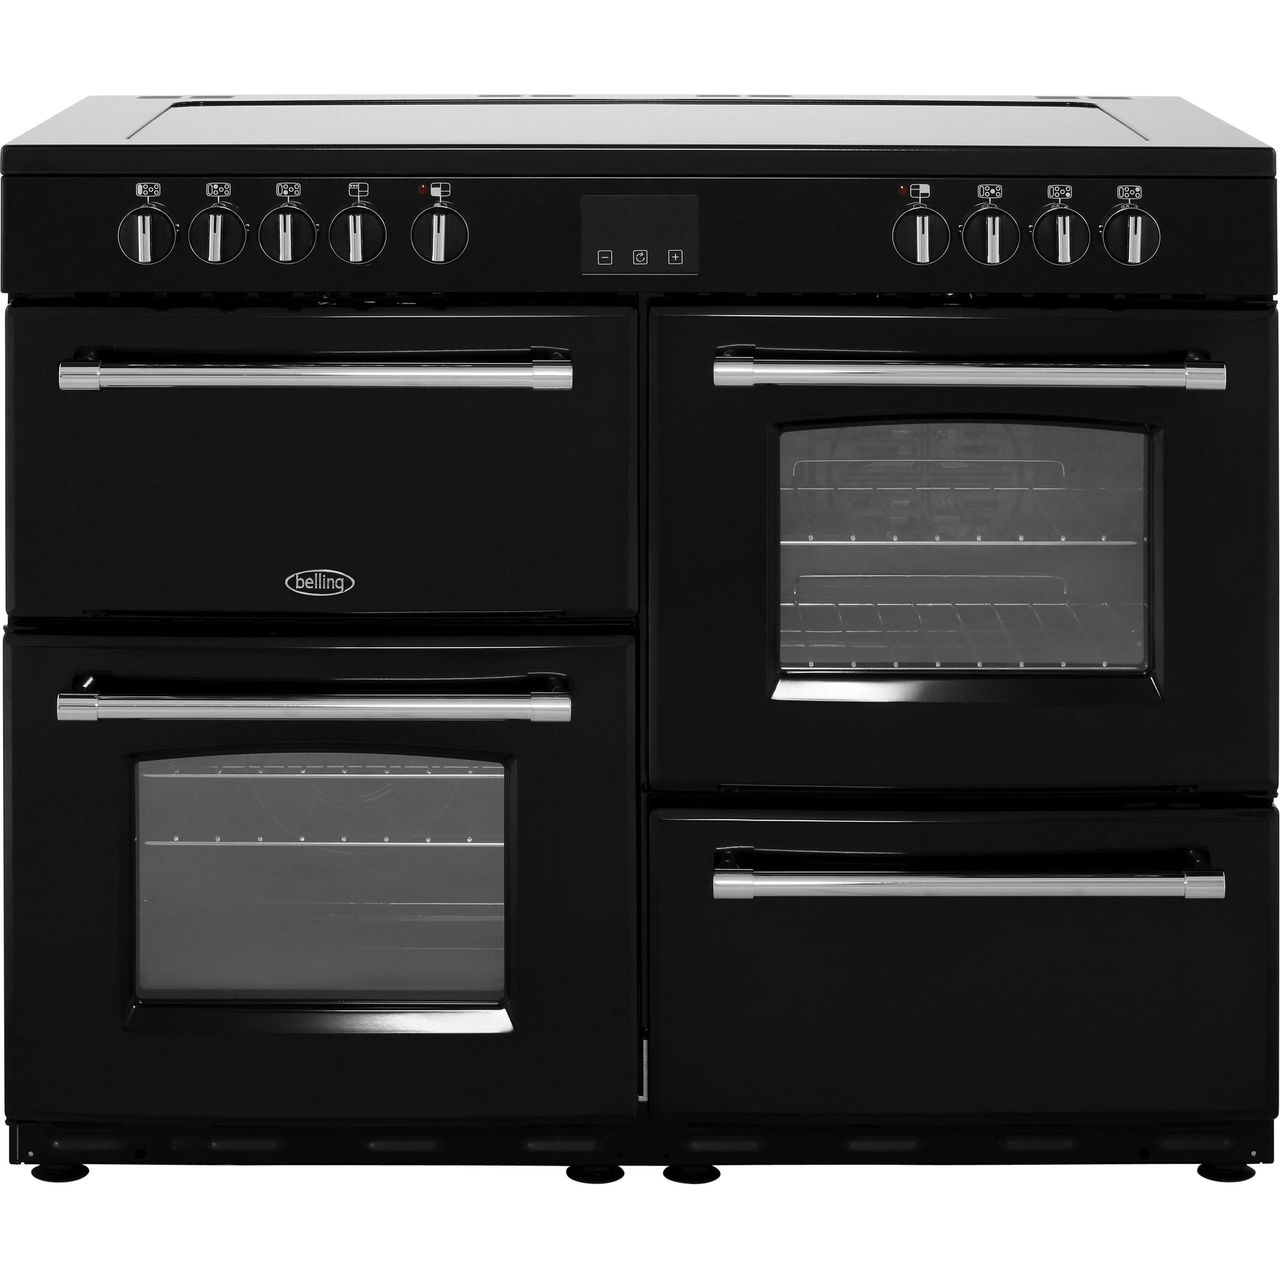 Belling Farmhouse110E 110cm Electric Range Cooker with Ceramic Hob Review